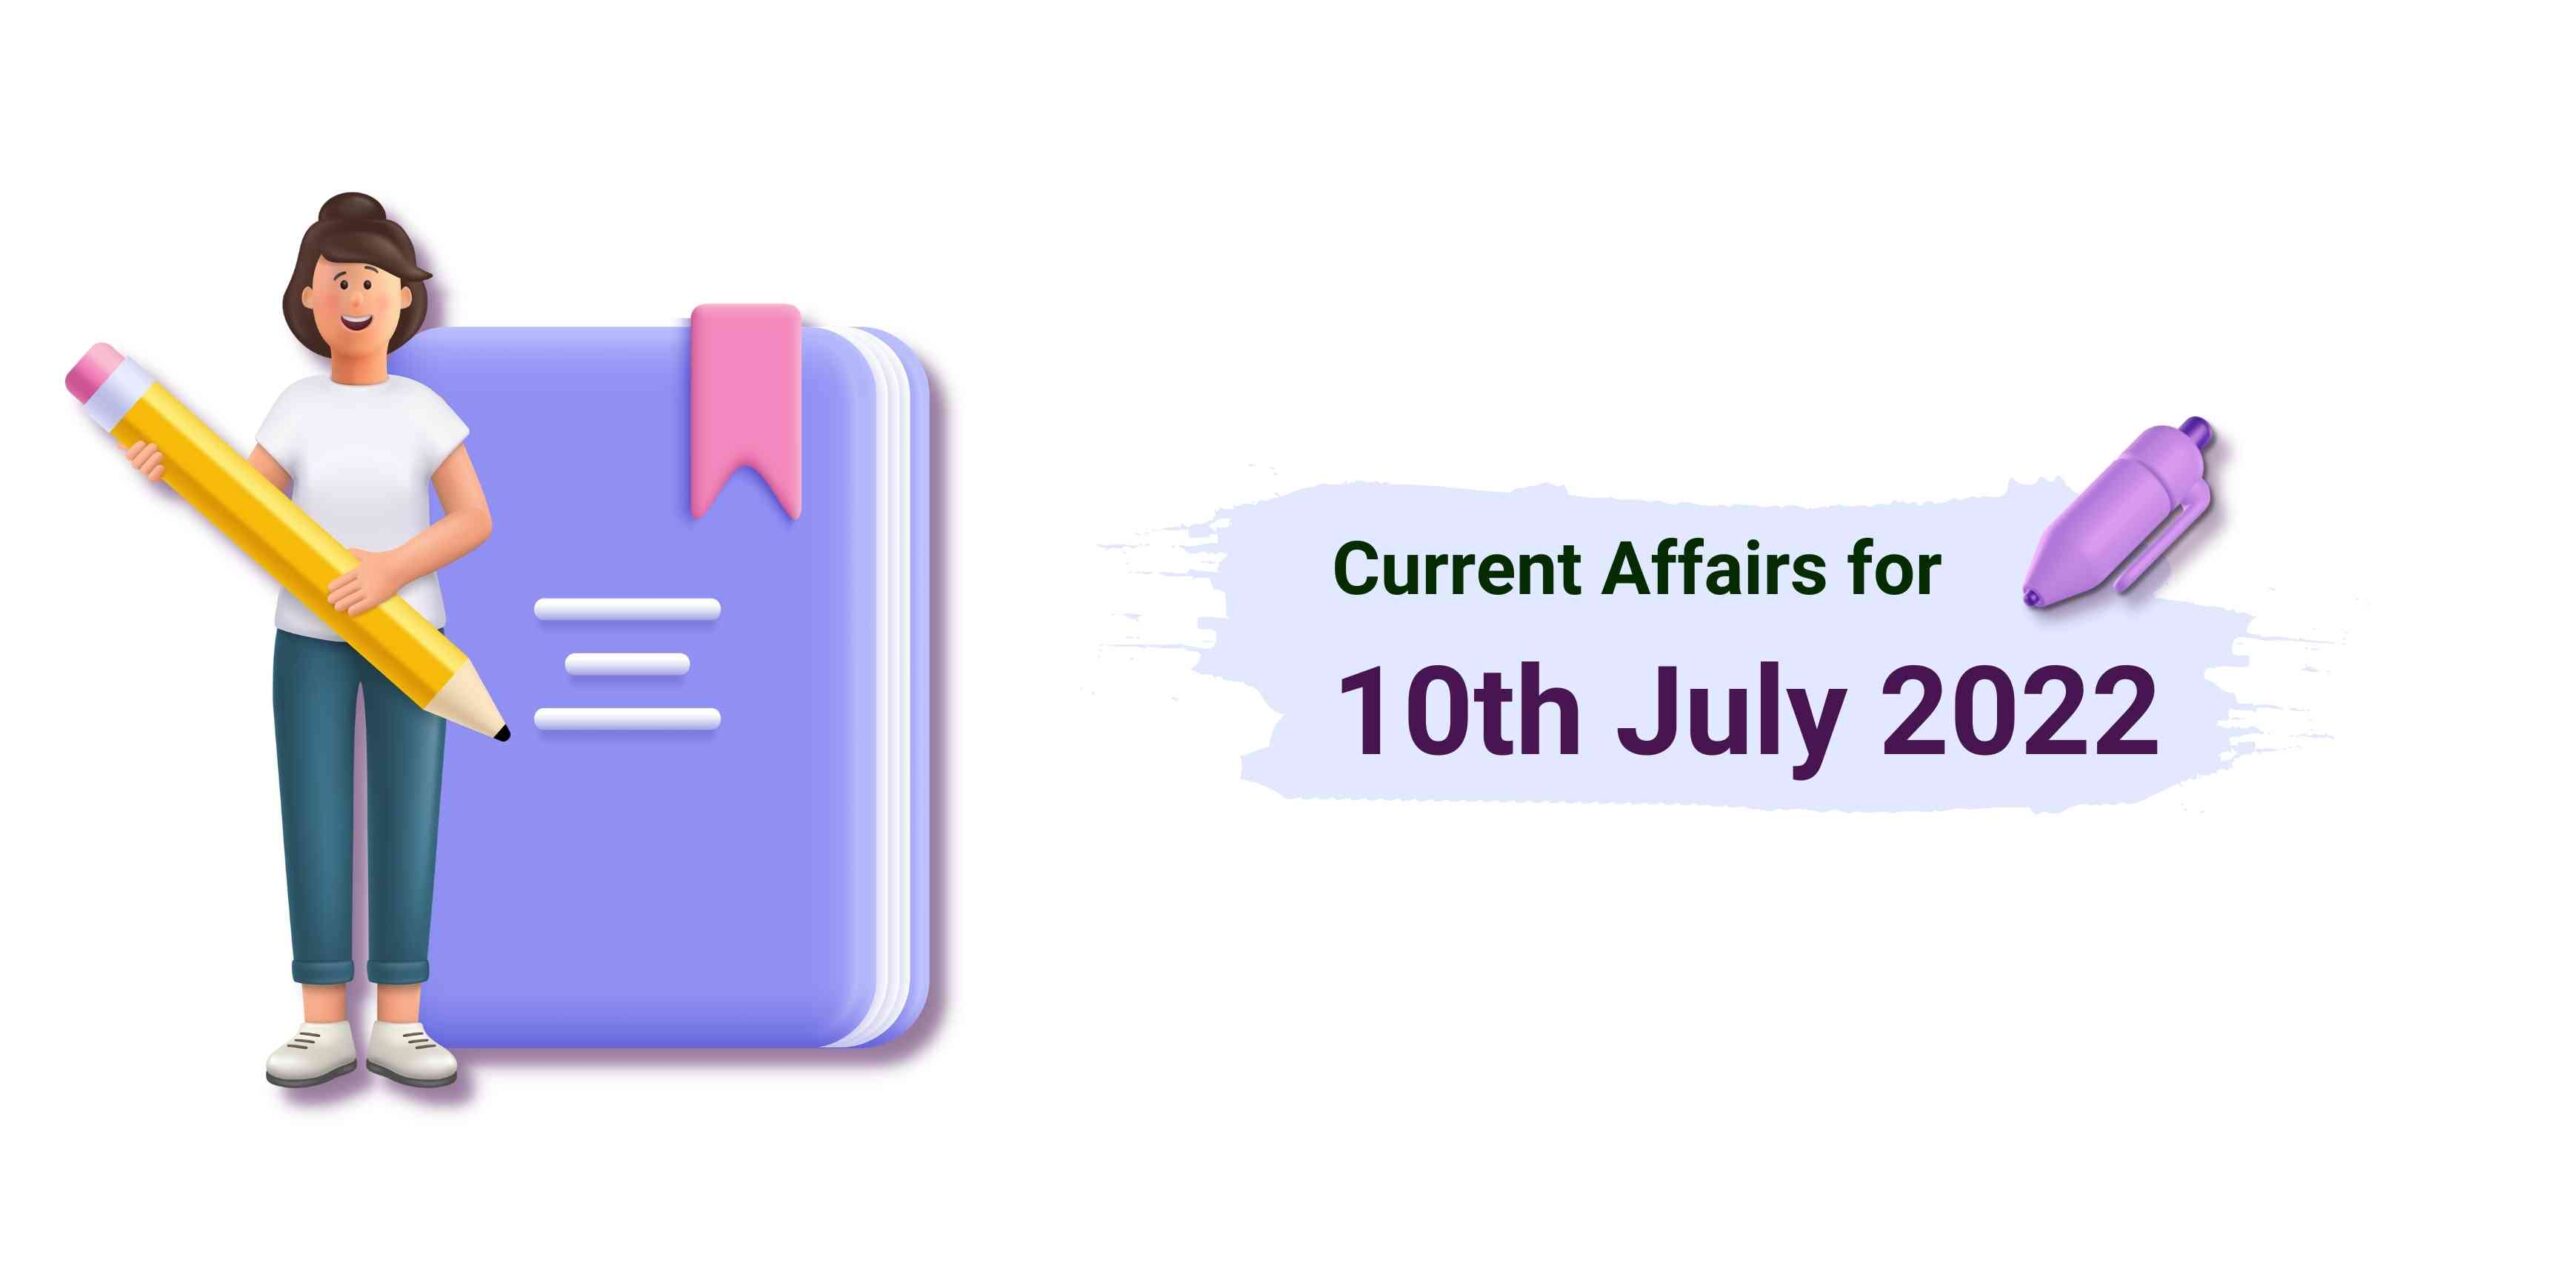 Current Affairs 10th July 2022